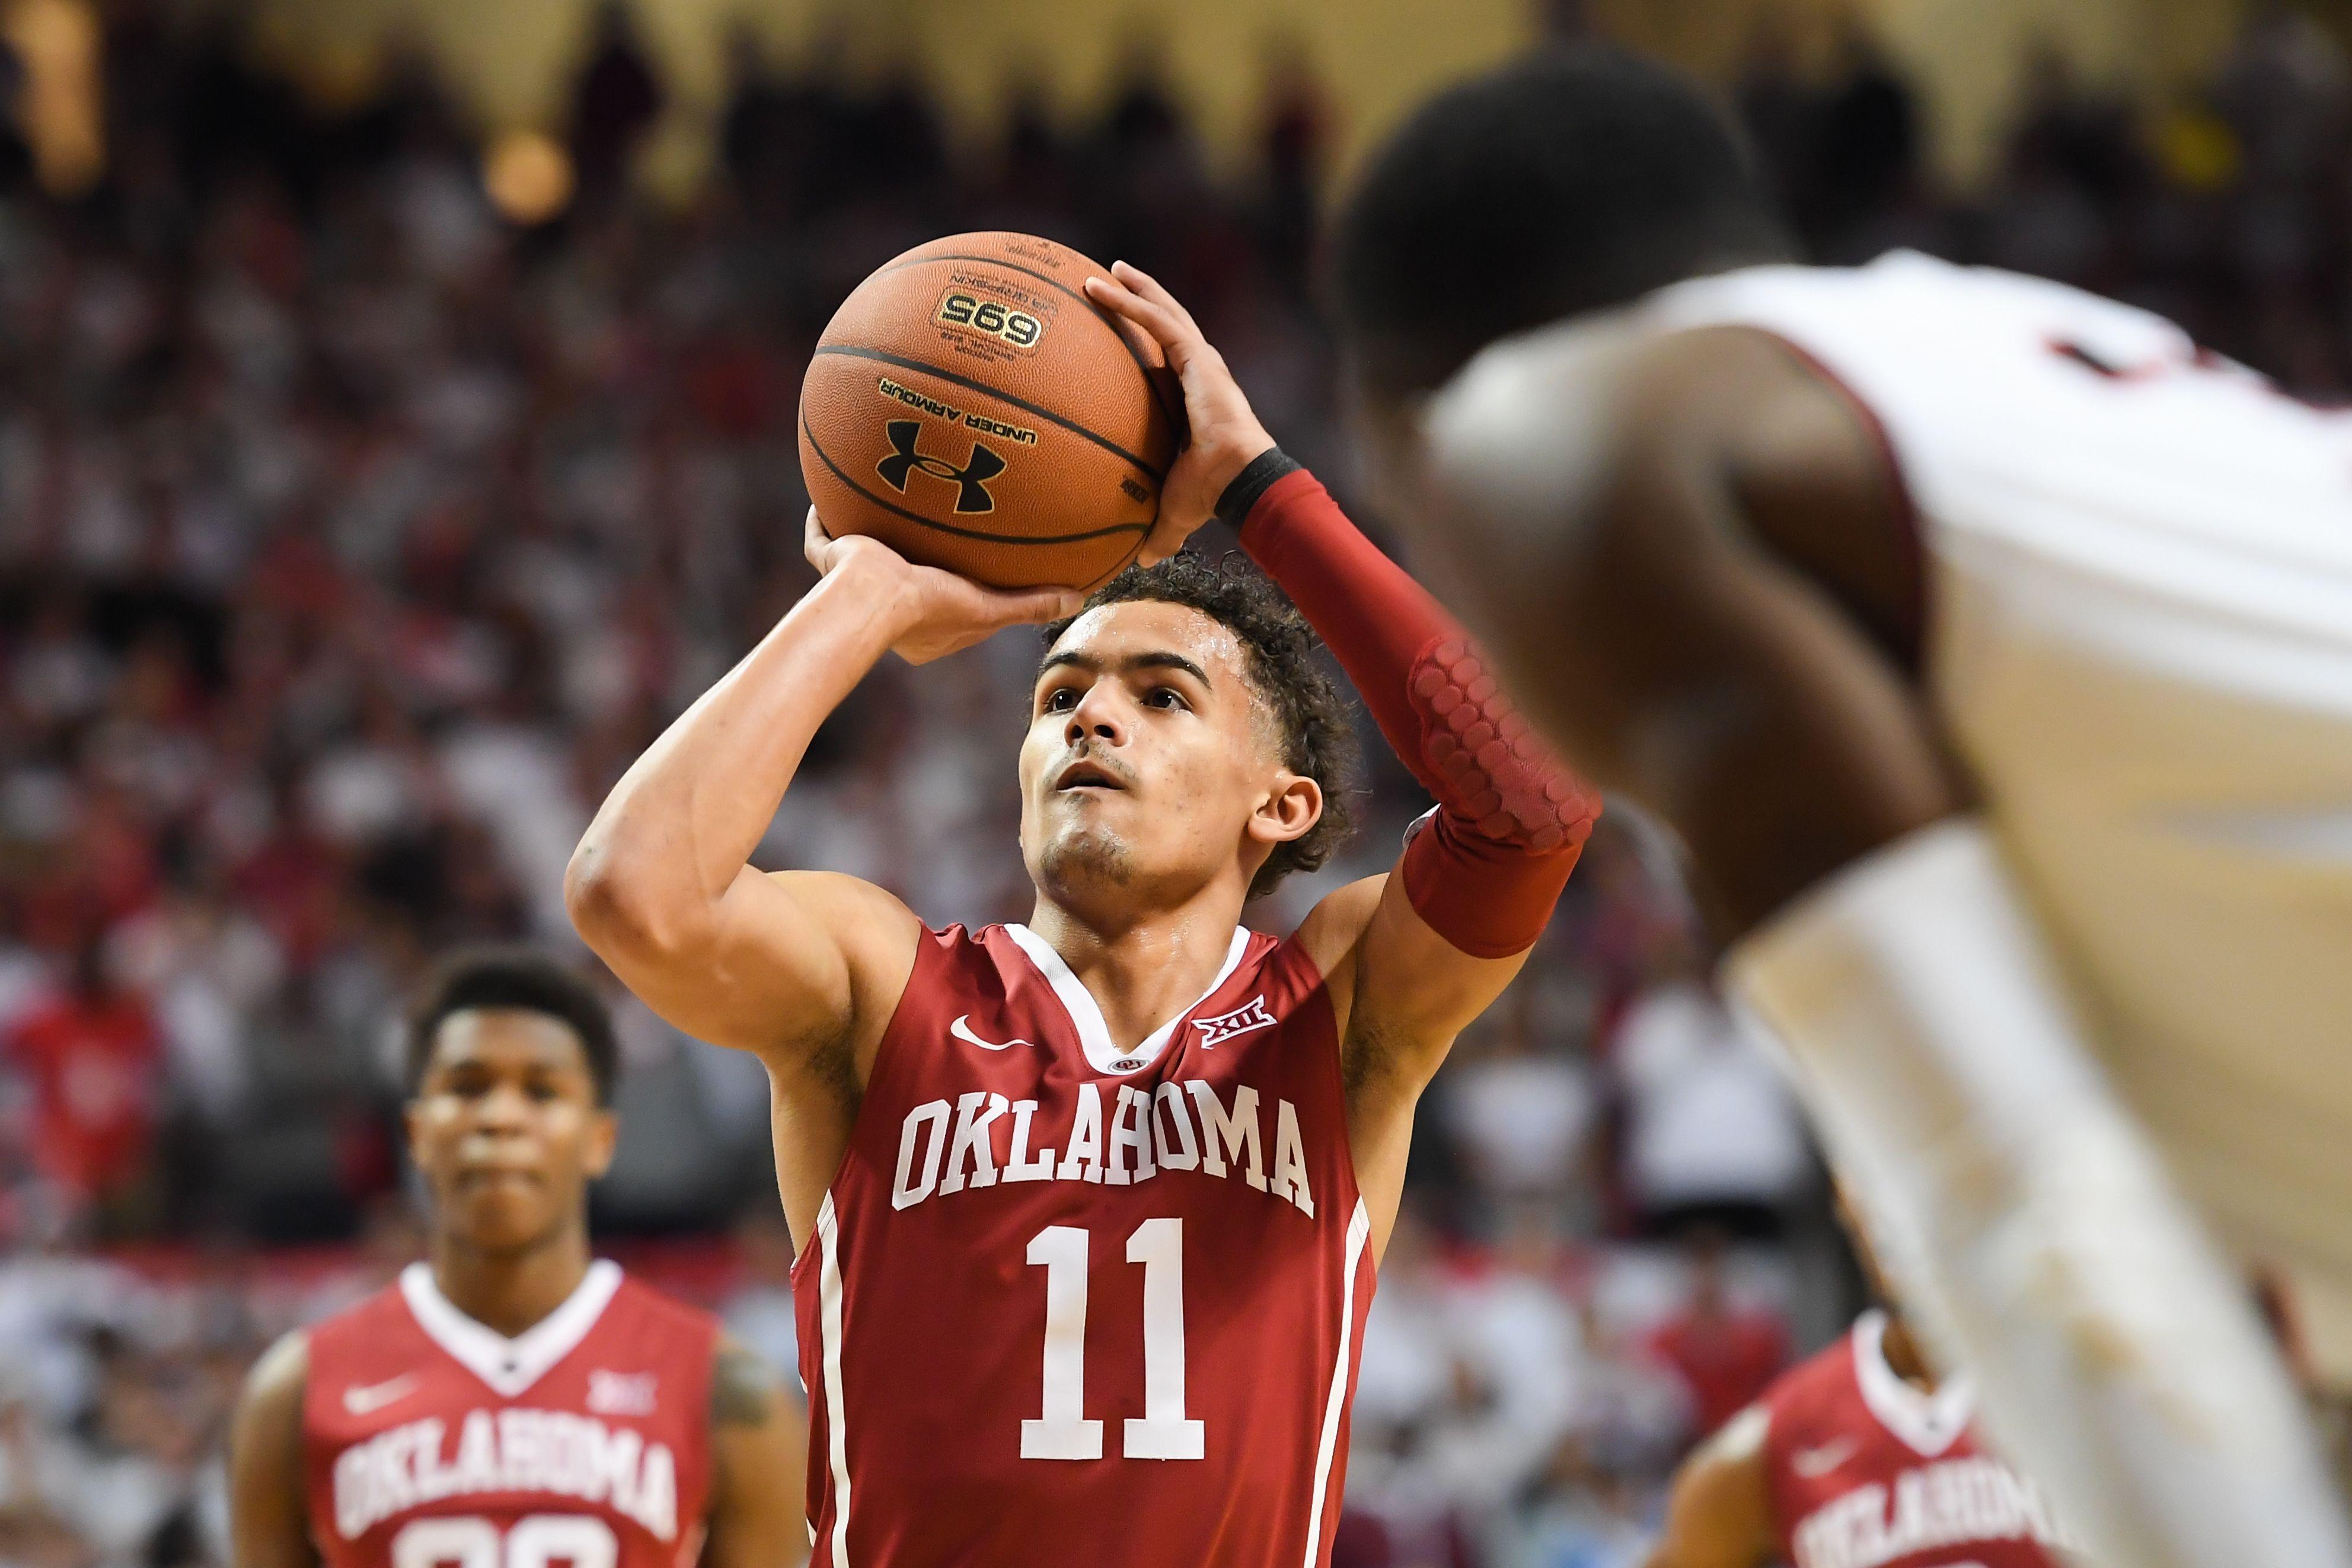 Oklahoma basketball: Hw high is high for Trae Young in the NBA Draft?